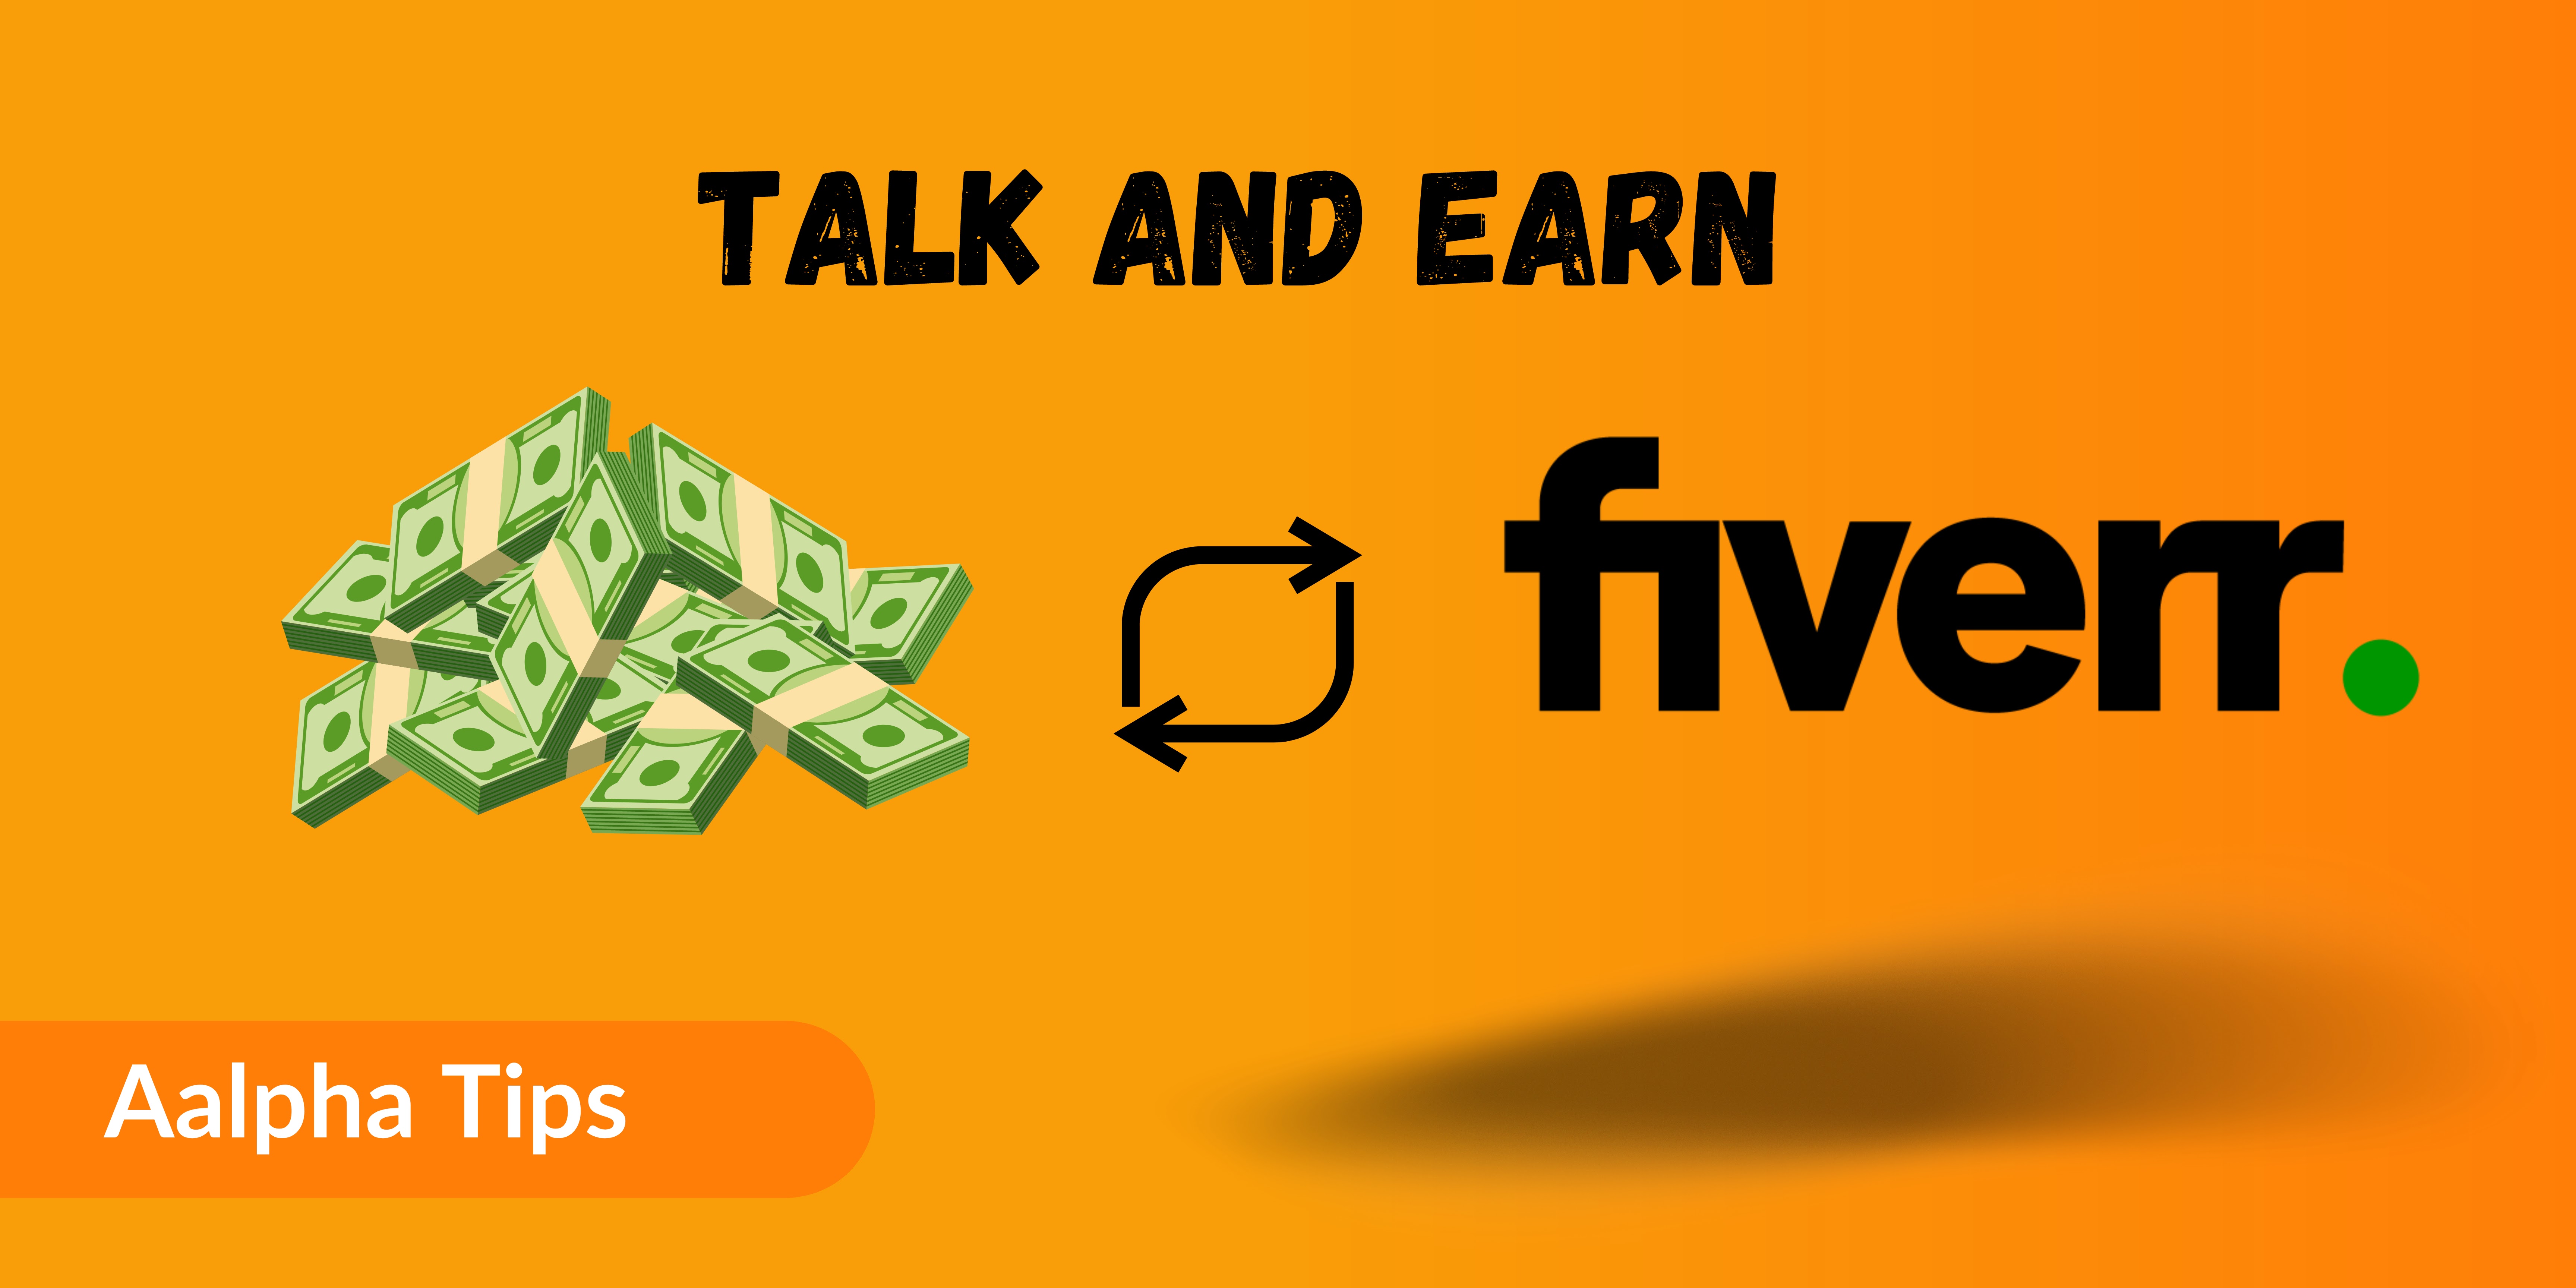 Talk and Earn on Fiverr